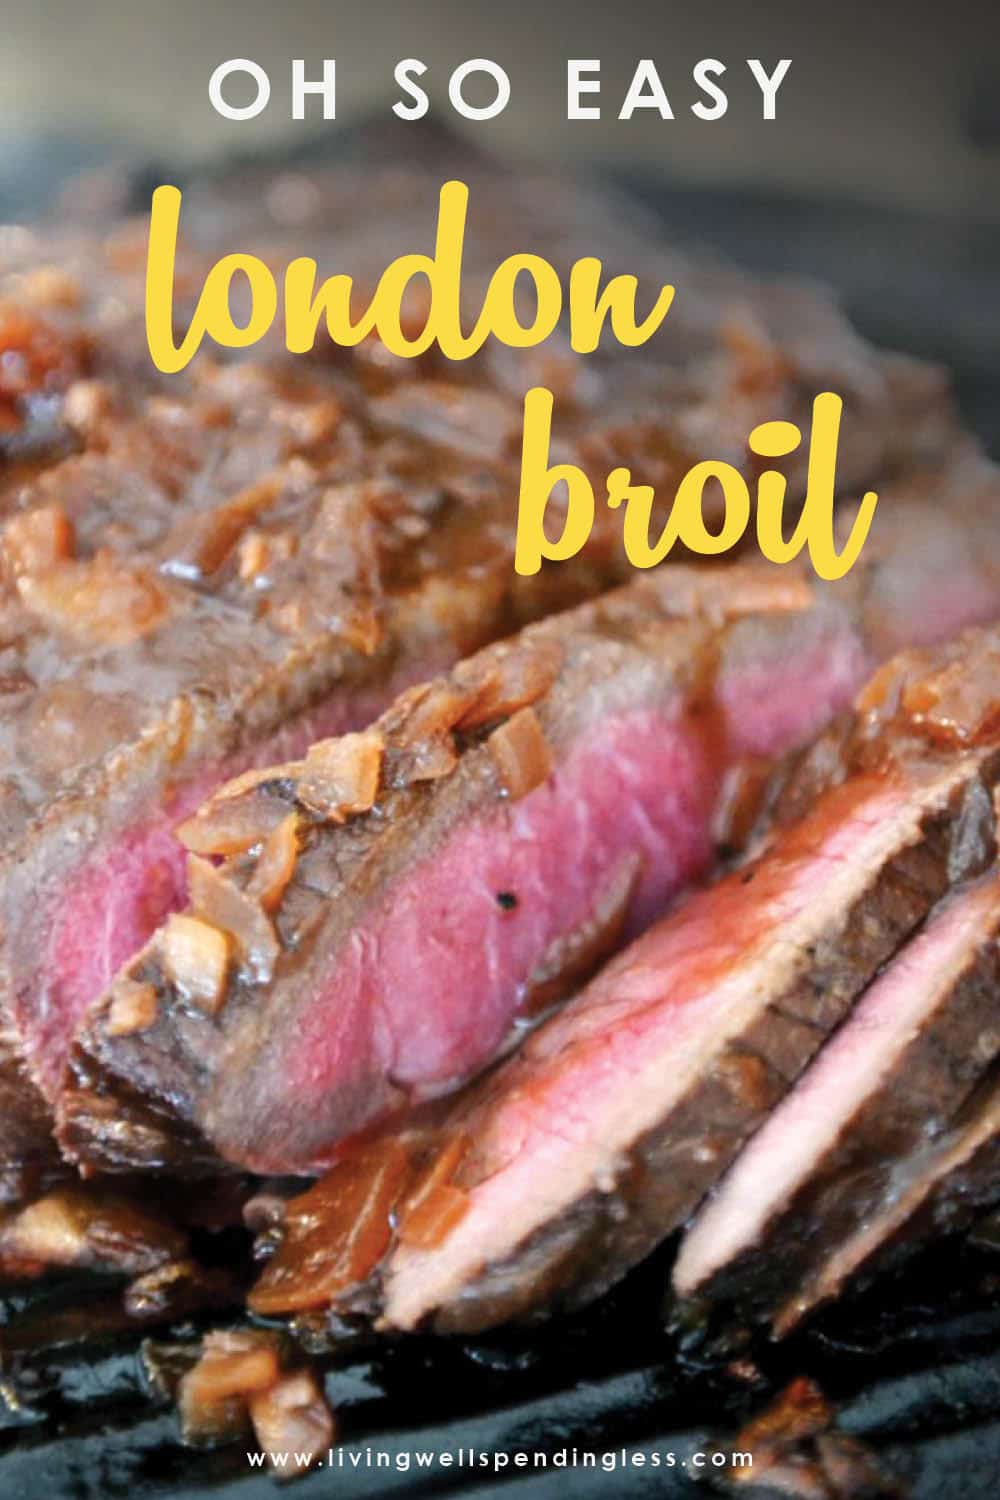 This easy London broil recipe is so delicious--made from ingredients right in the pantry. This tender beef recipe is a winner! #easydinner #mealplan #meat #londonbroil